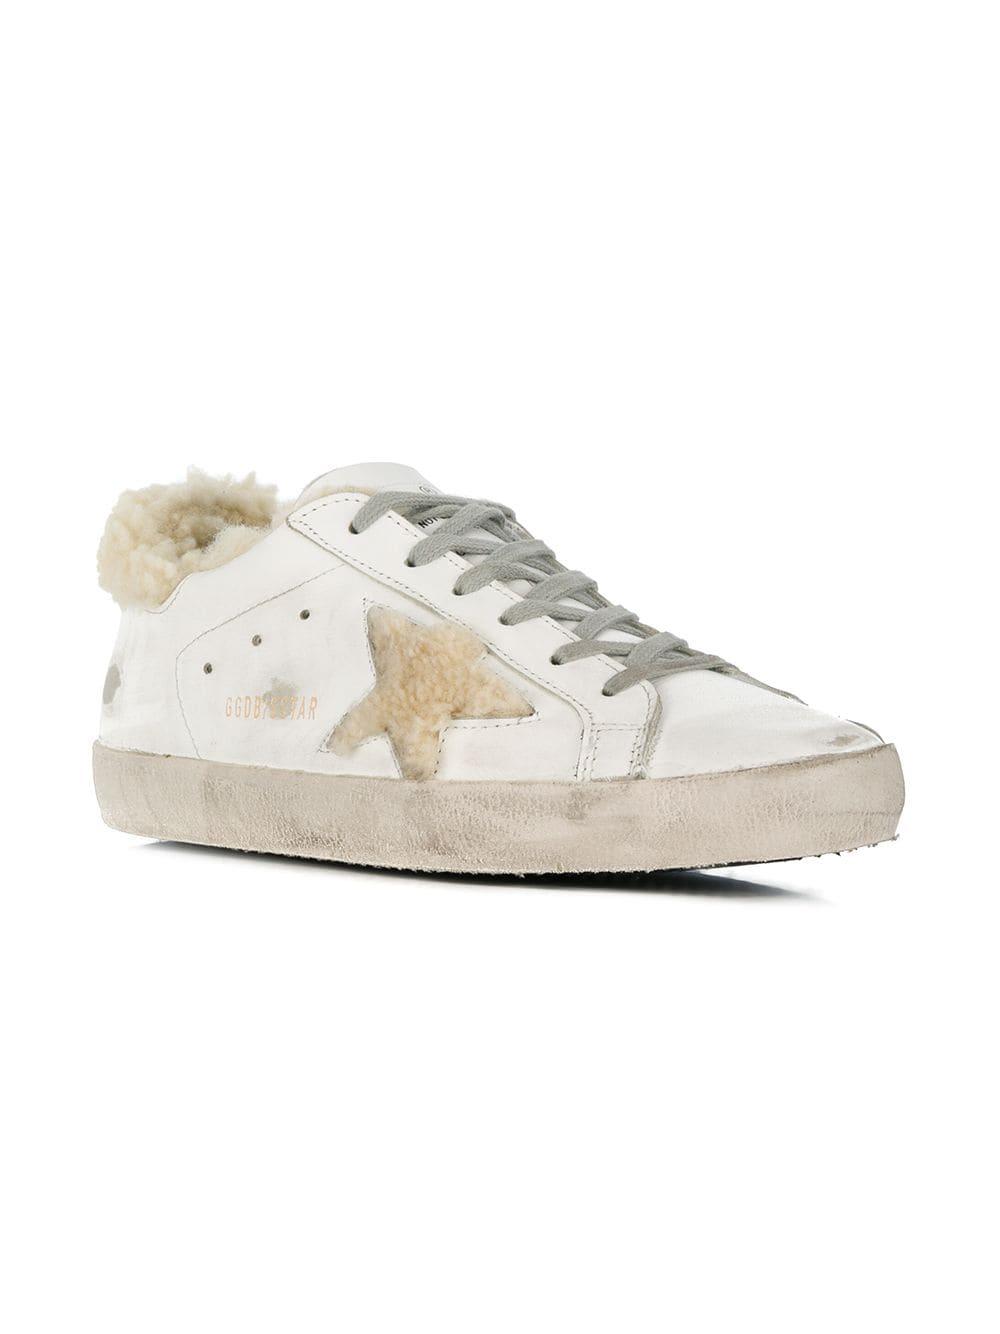 Golden Goose Superstar Shearling Lined Sneakers in White Lyst